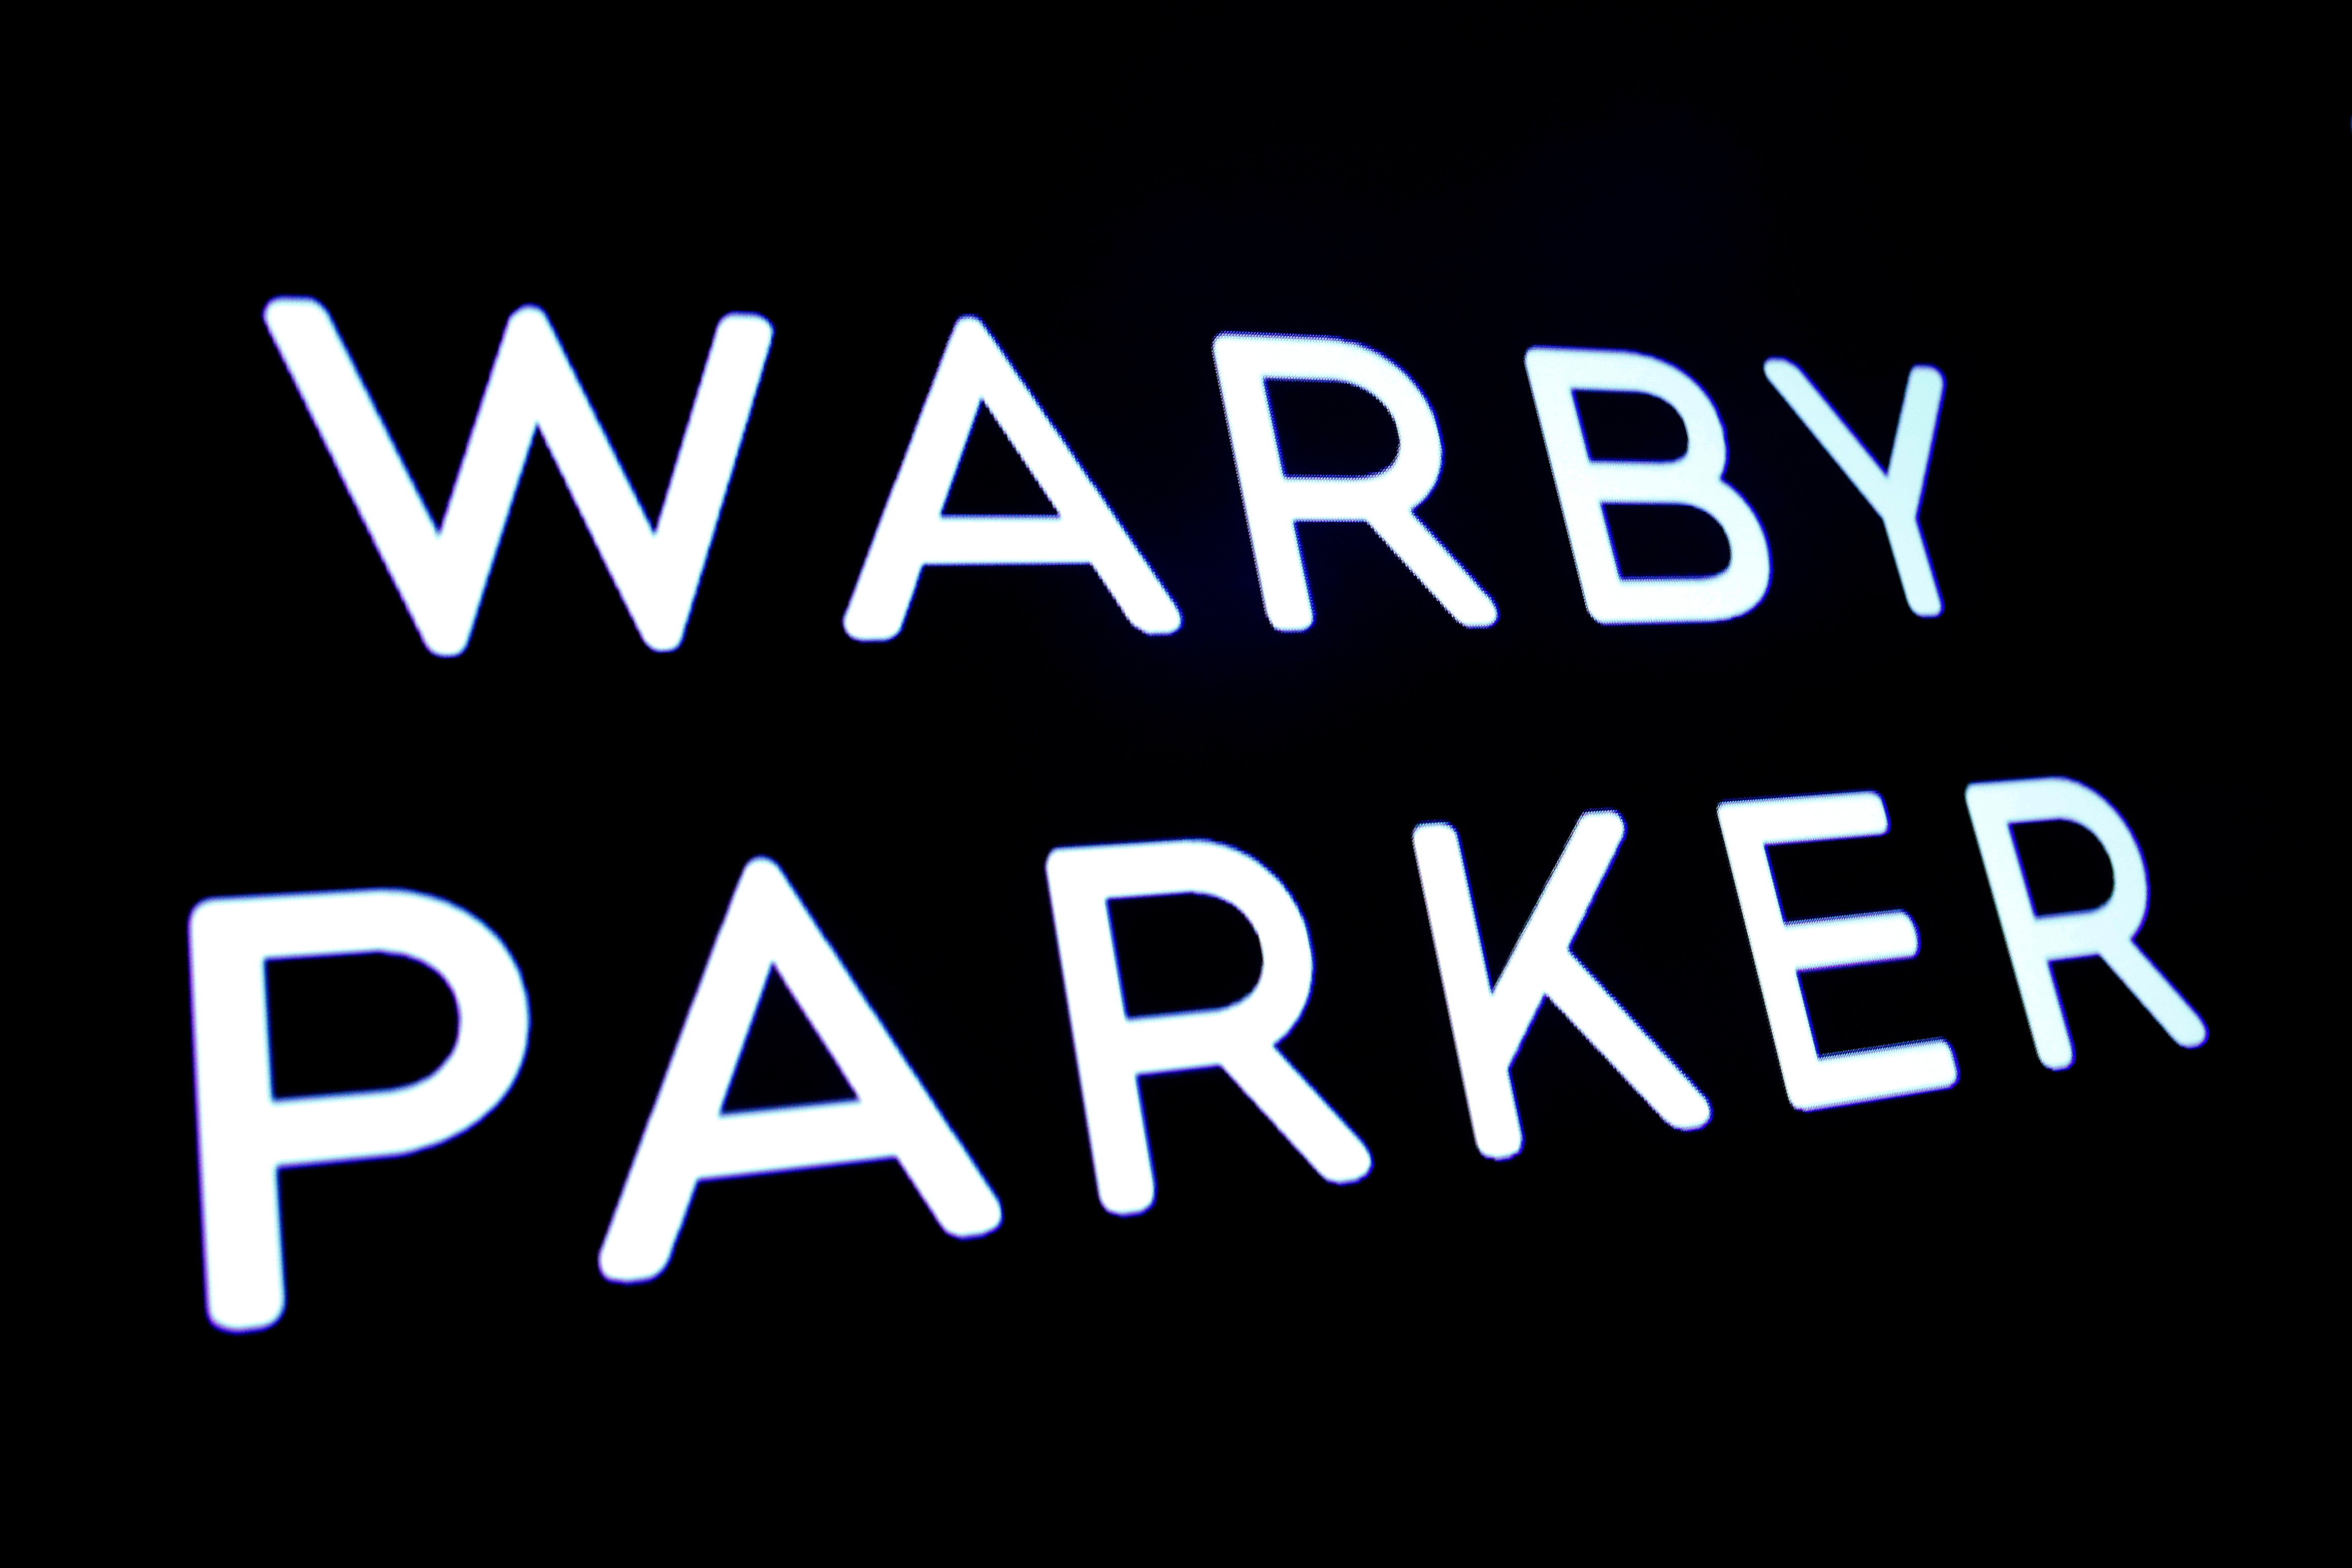 The company logo for eyeglass retailer Warby Parker is displayed on a screen during the company's direct listing at the NYSE in New York